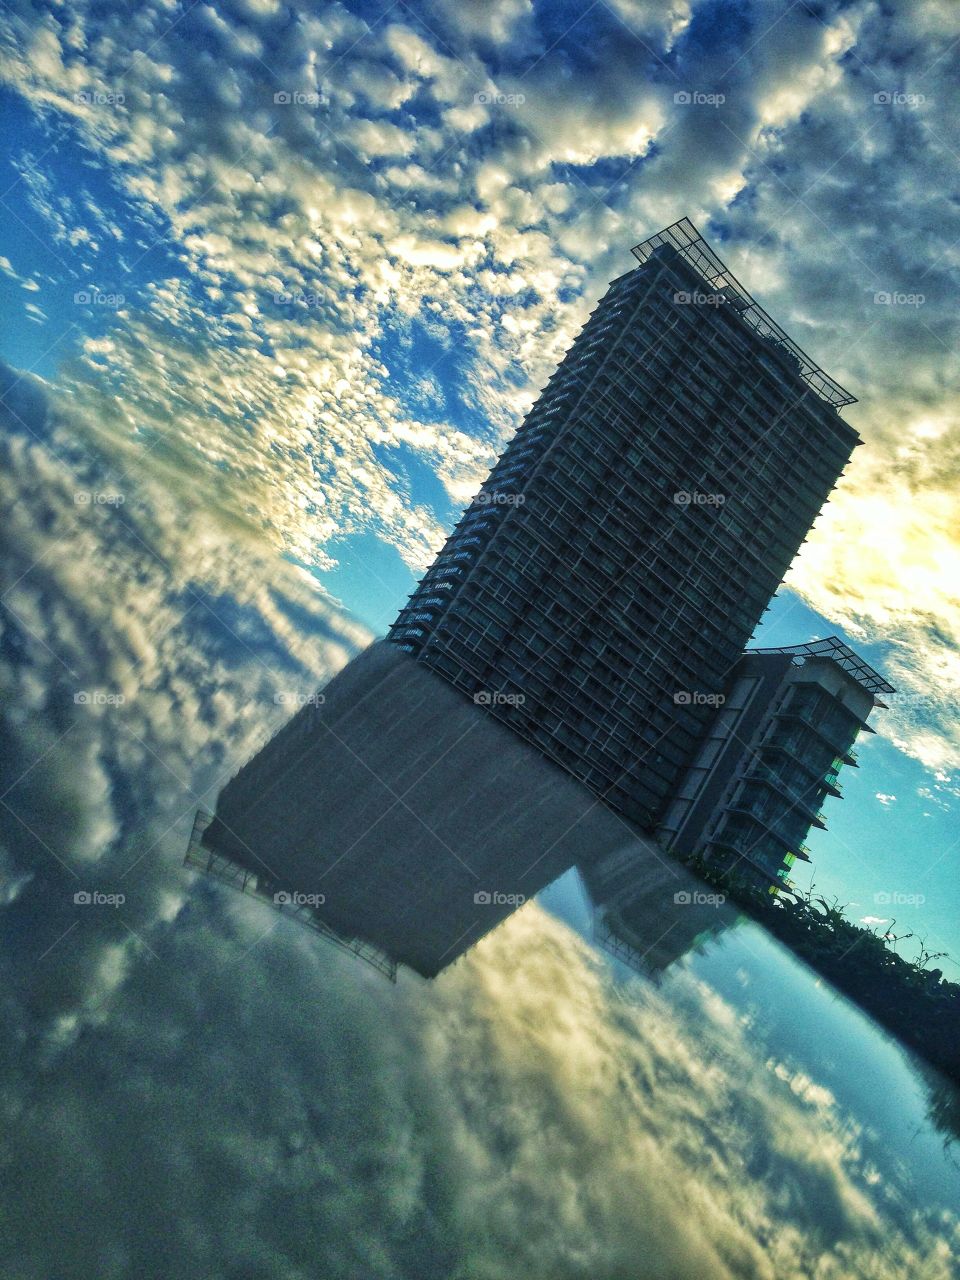 Skyscraper reflection on a sunny day with clouds